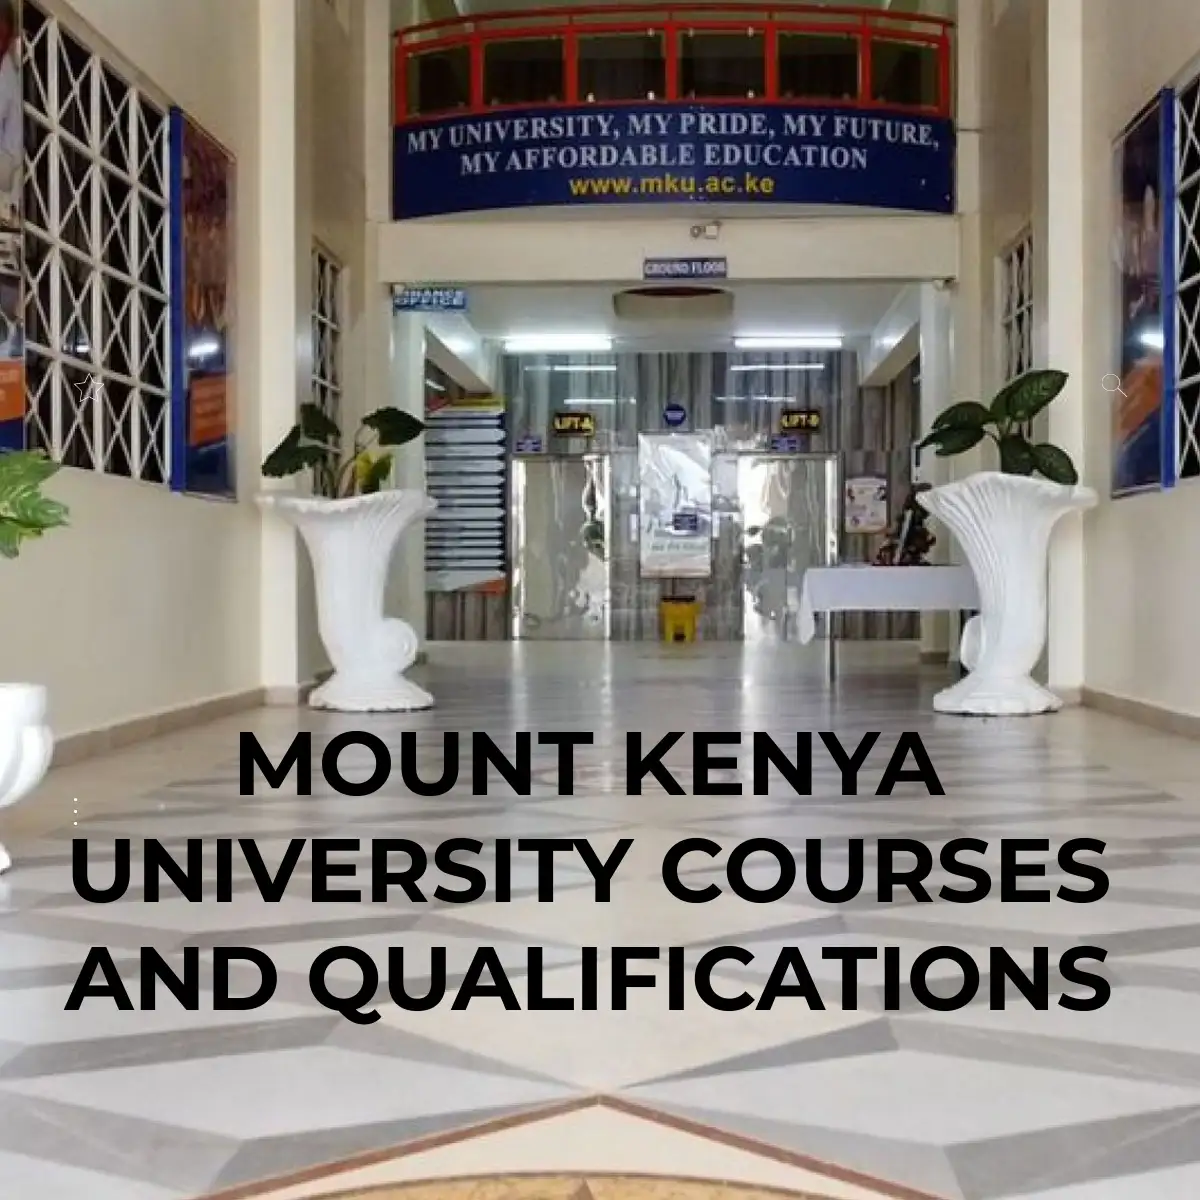 Mount Kenya University Courses and Qualifications